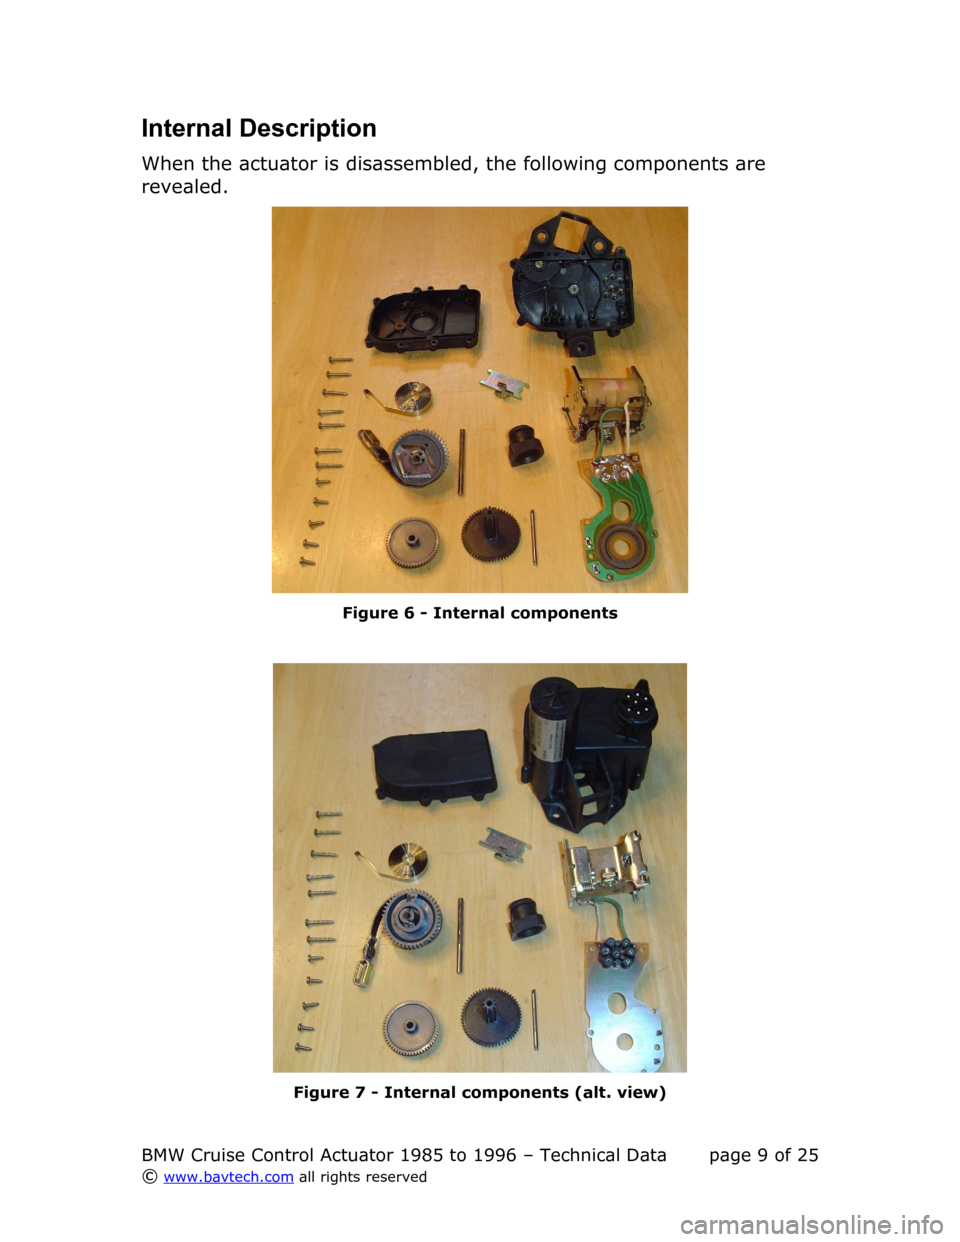 BMW 3 SERIES 1992 E36 Cruise Control Acutator Internal Description
When the actuator is disassembled, the following components are  
revealed.
Figure  6  - Internal components
Figure  7  - Internal components (alt. view)
BMW Cruise Control Actuat